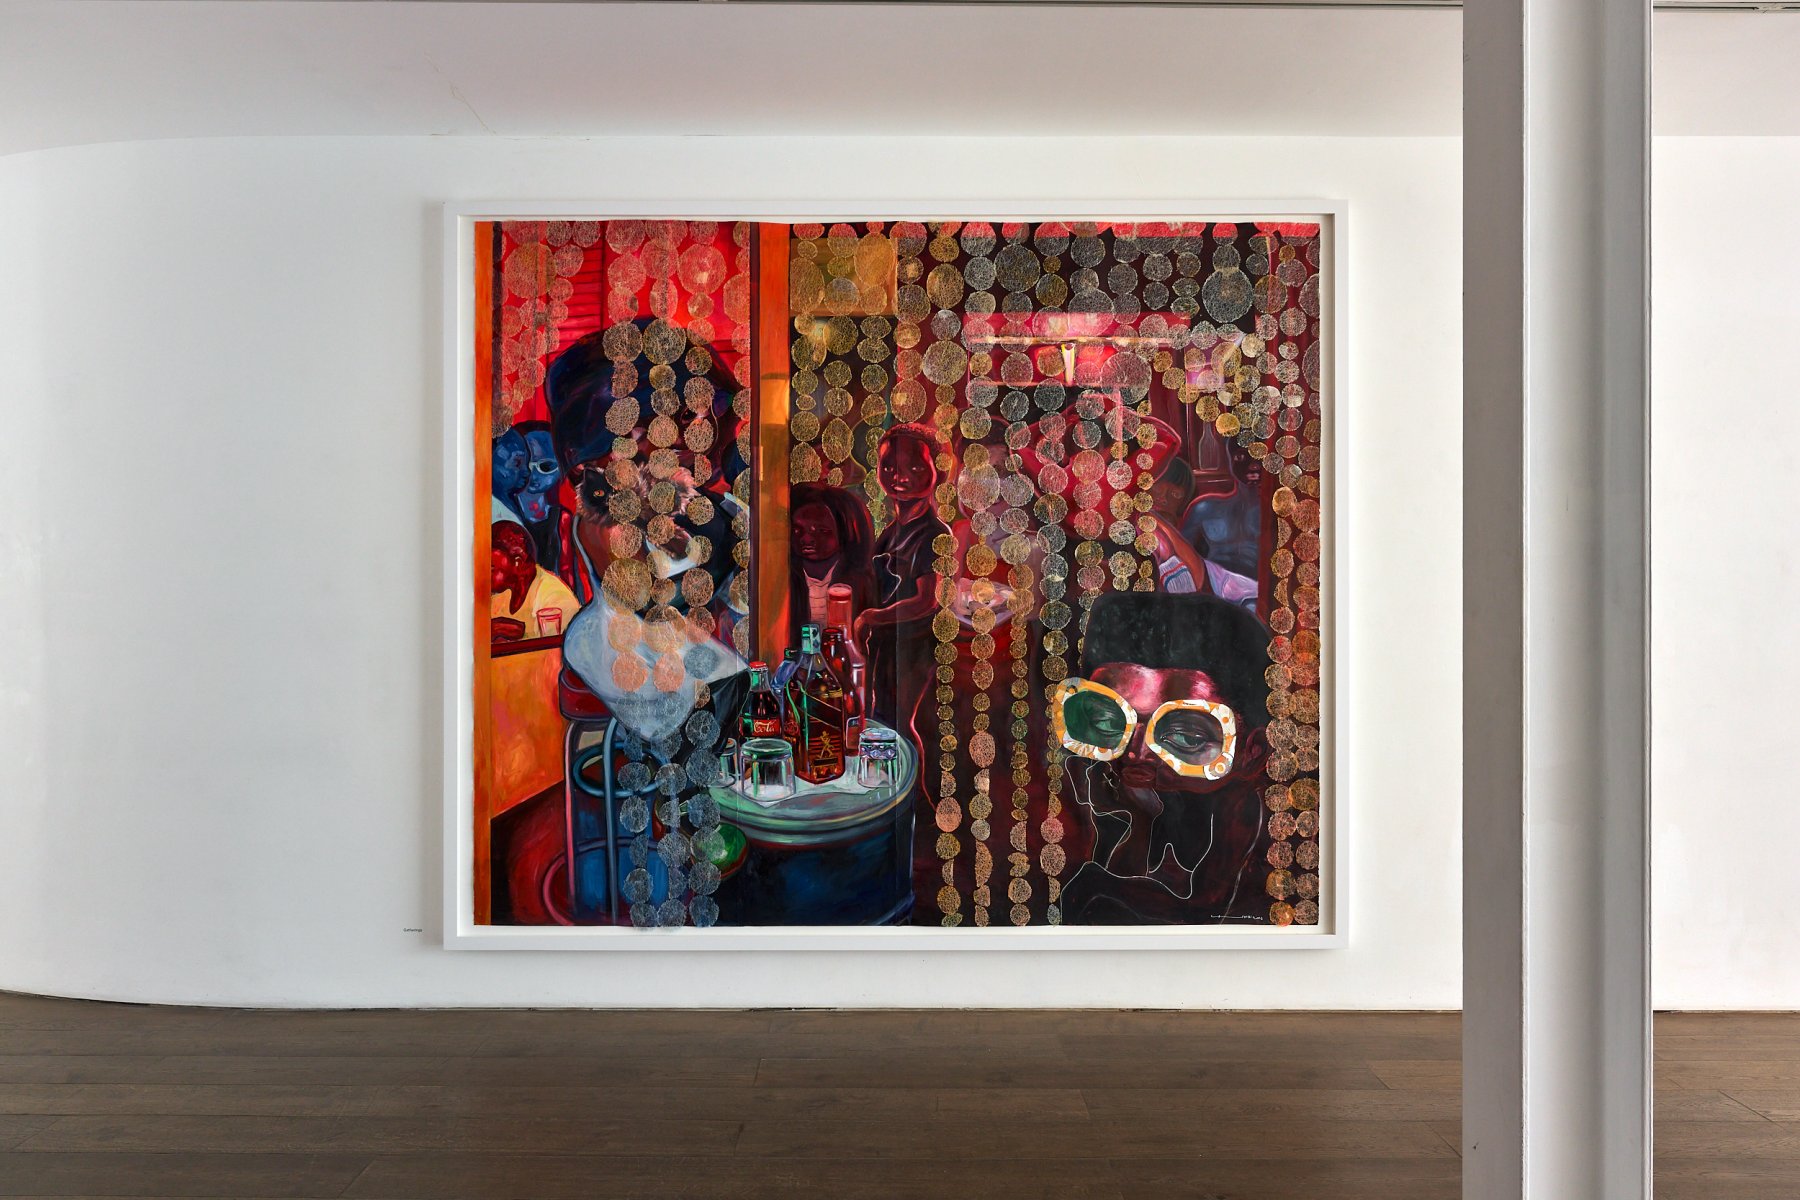 Installation image for Ndidi Emefiele: The Gift of Fellowship, at rosenfeld